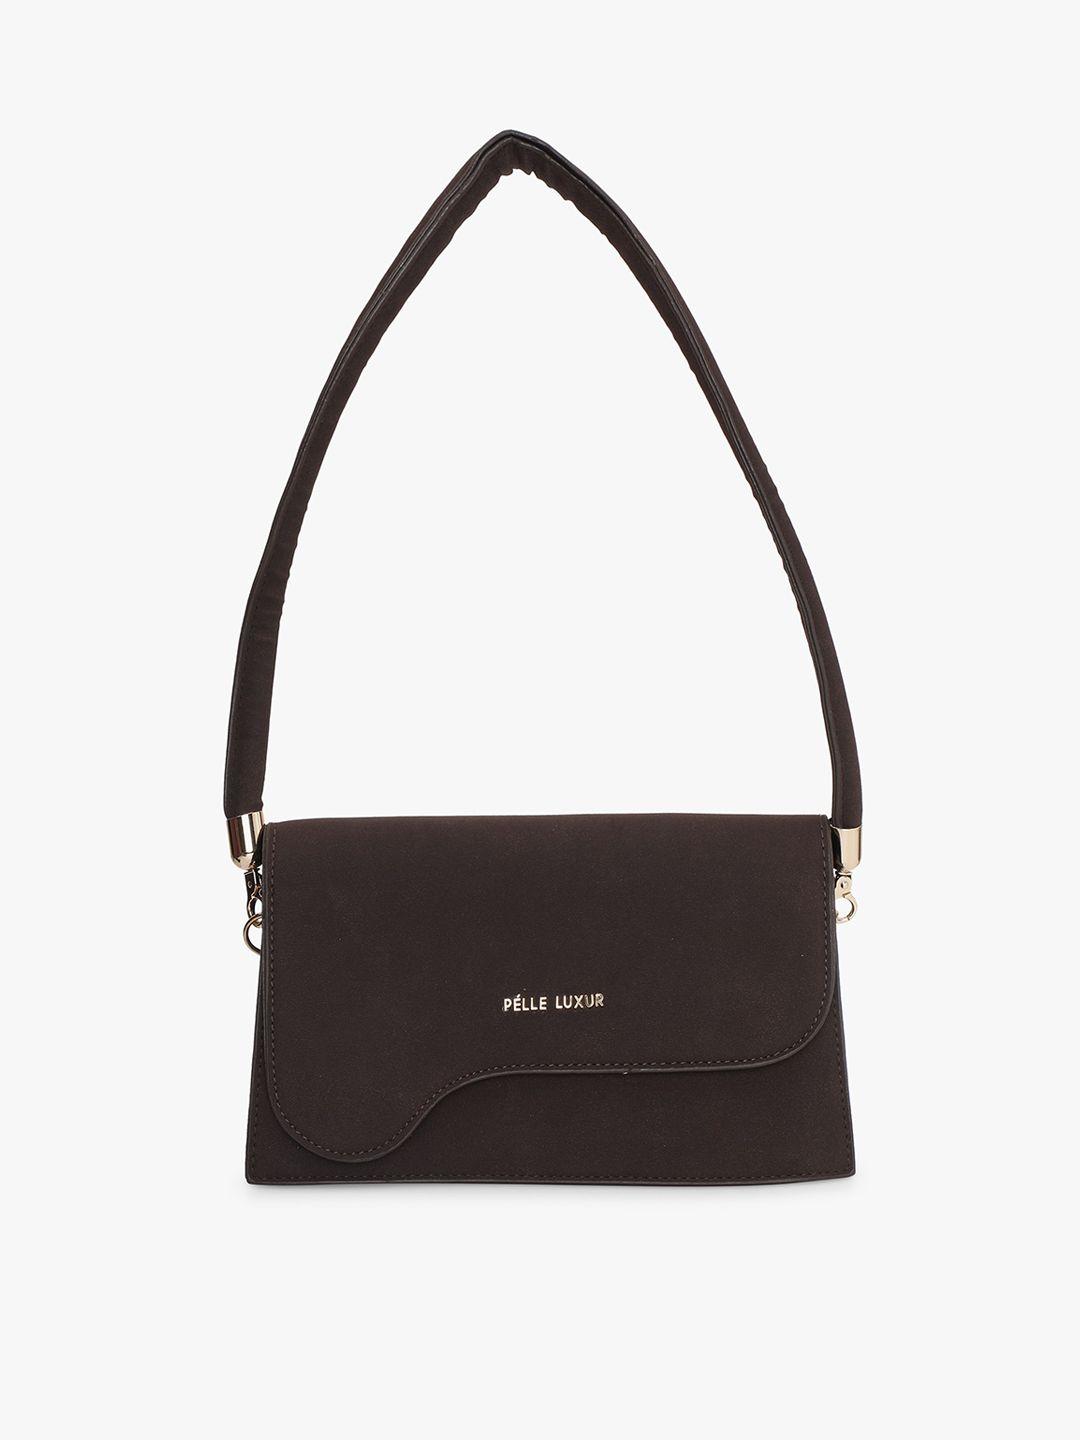 pelle luxur brown pu structured shoulder bag with bow detail